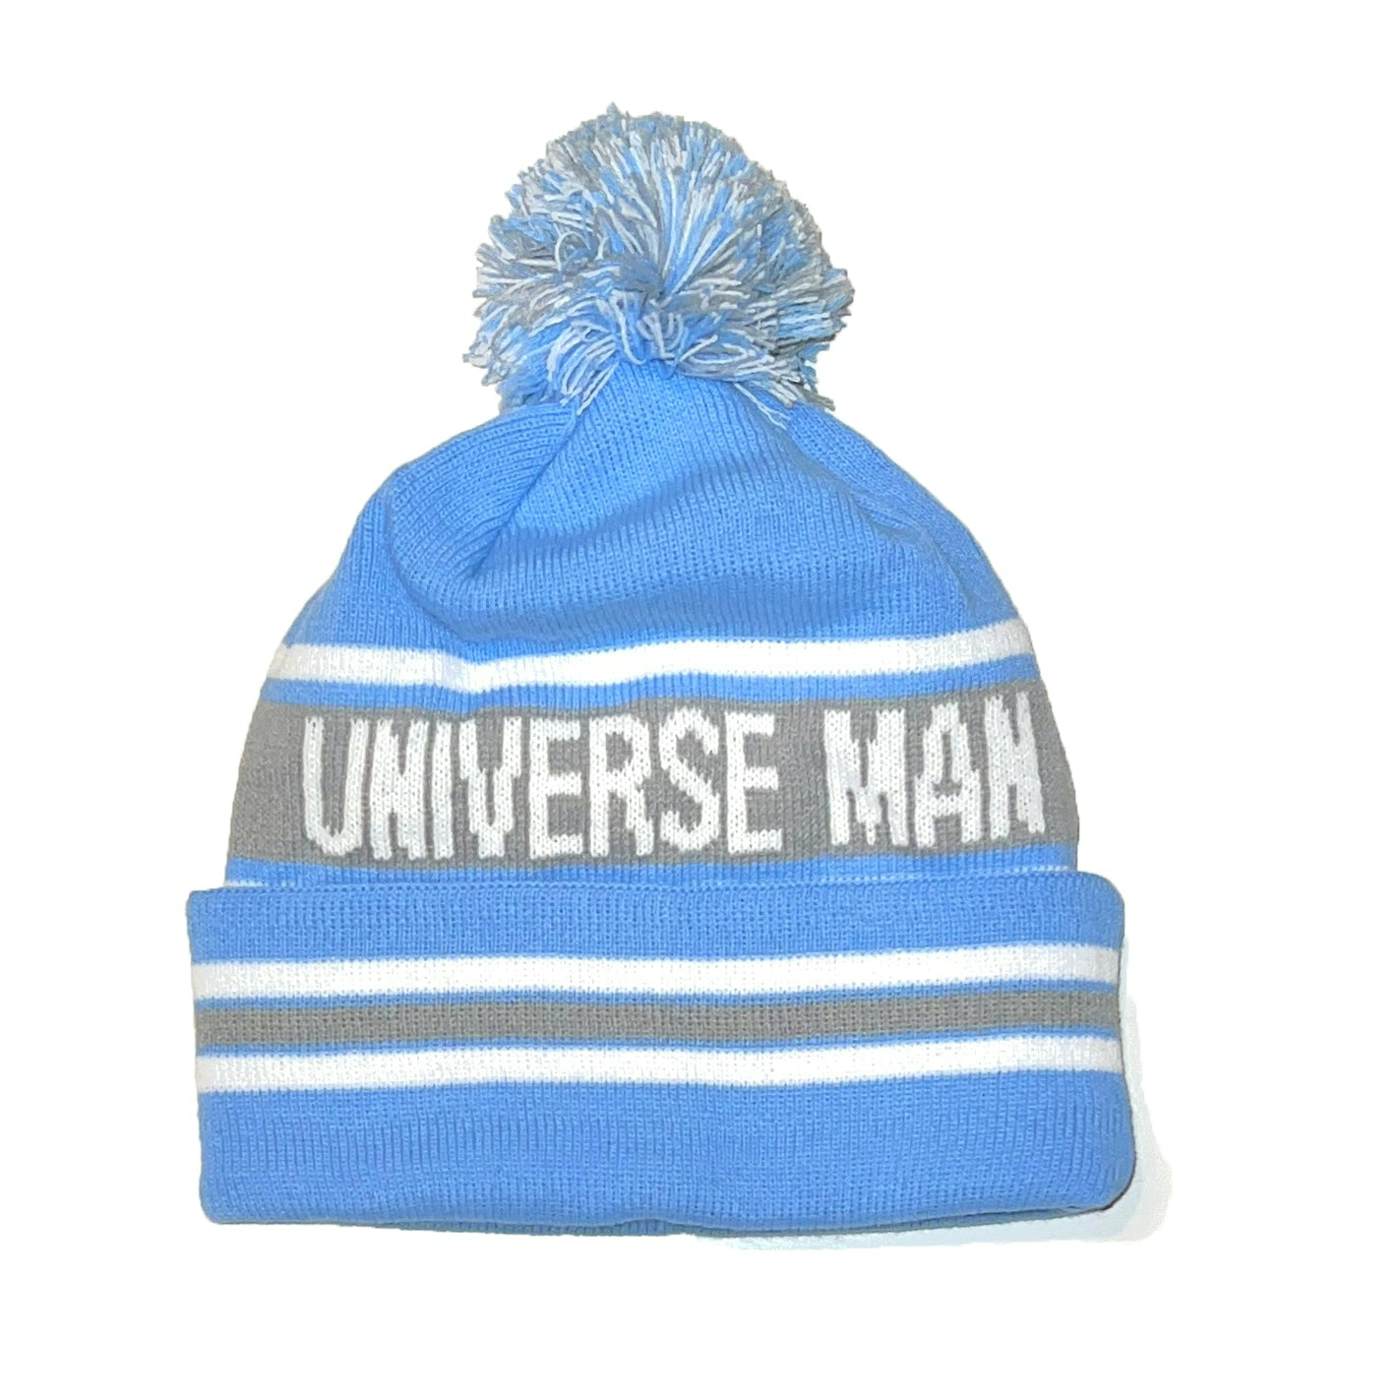 They Might Be Giants Universe Man Hat